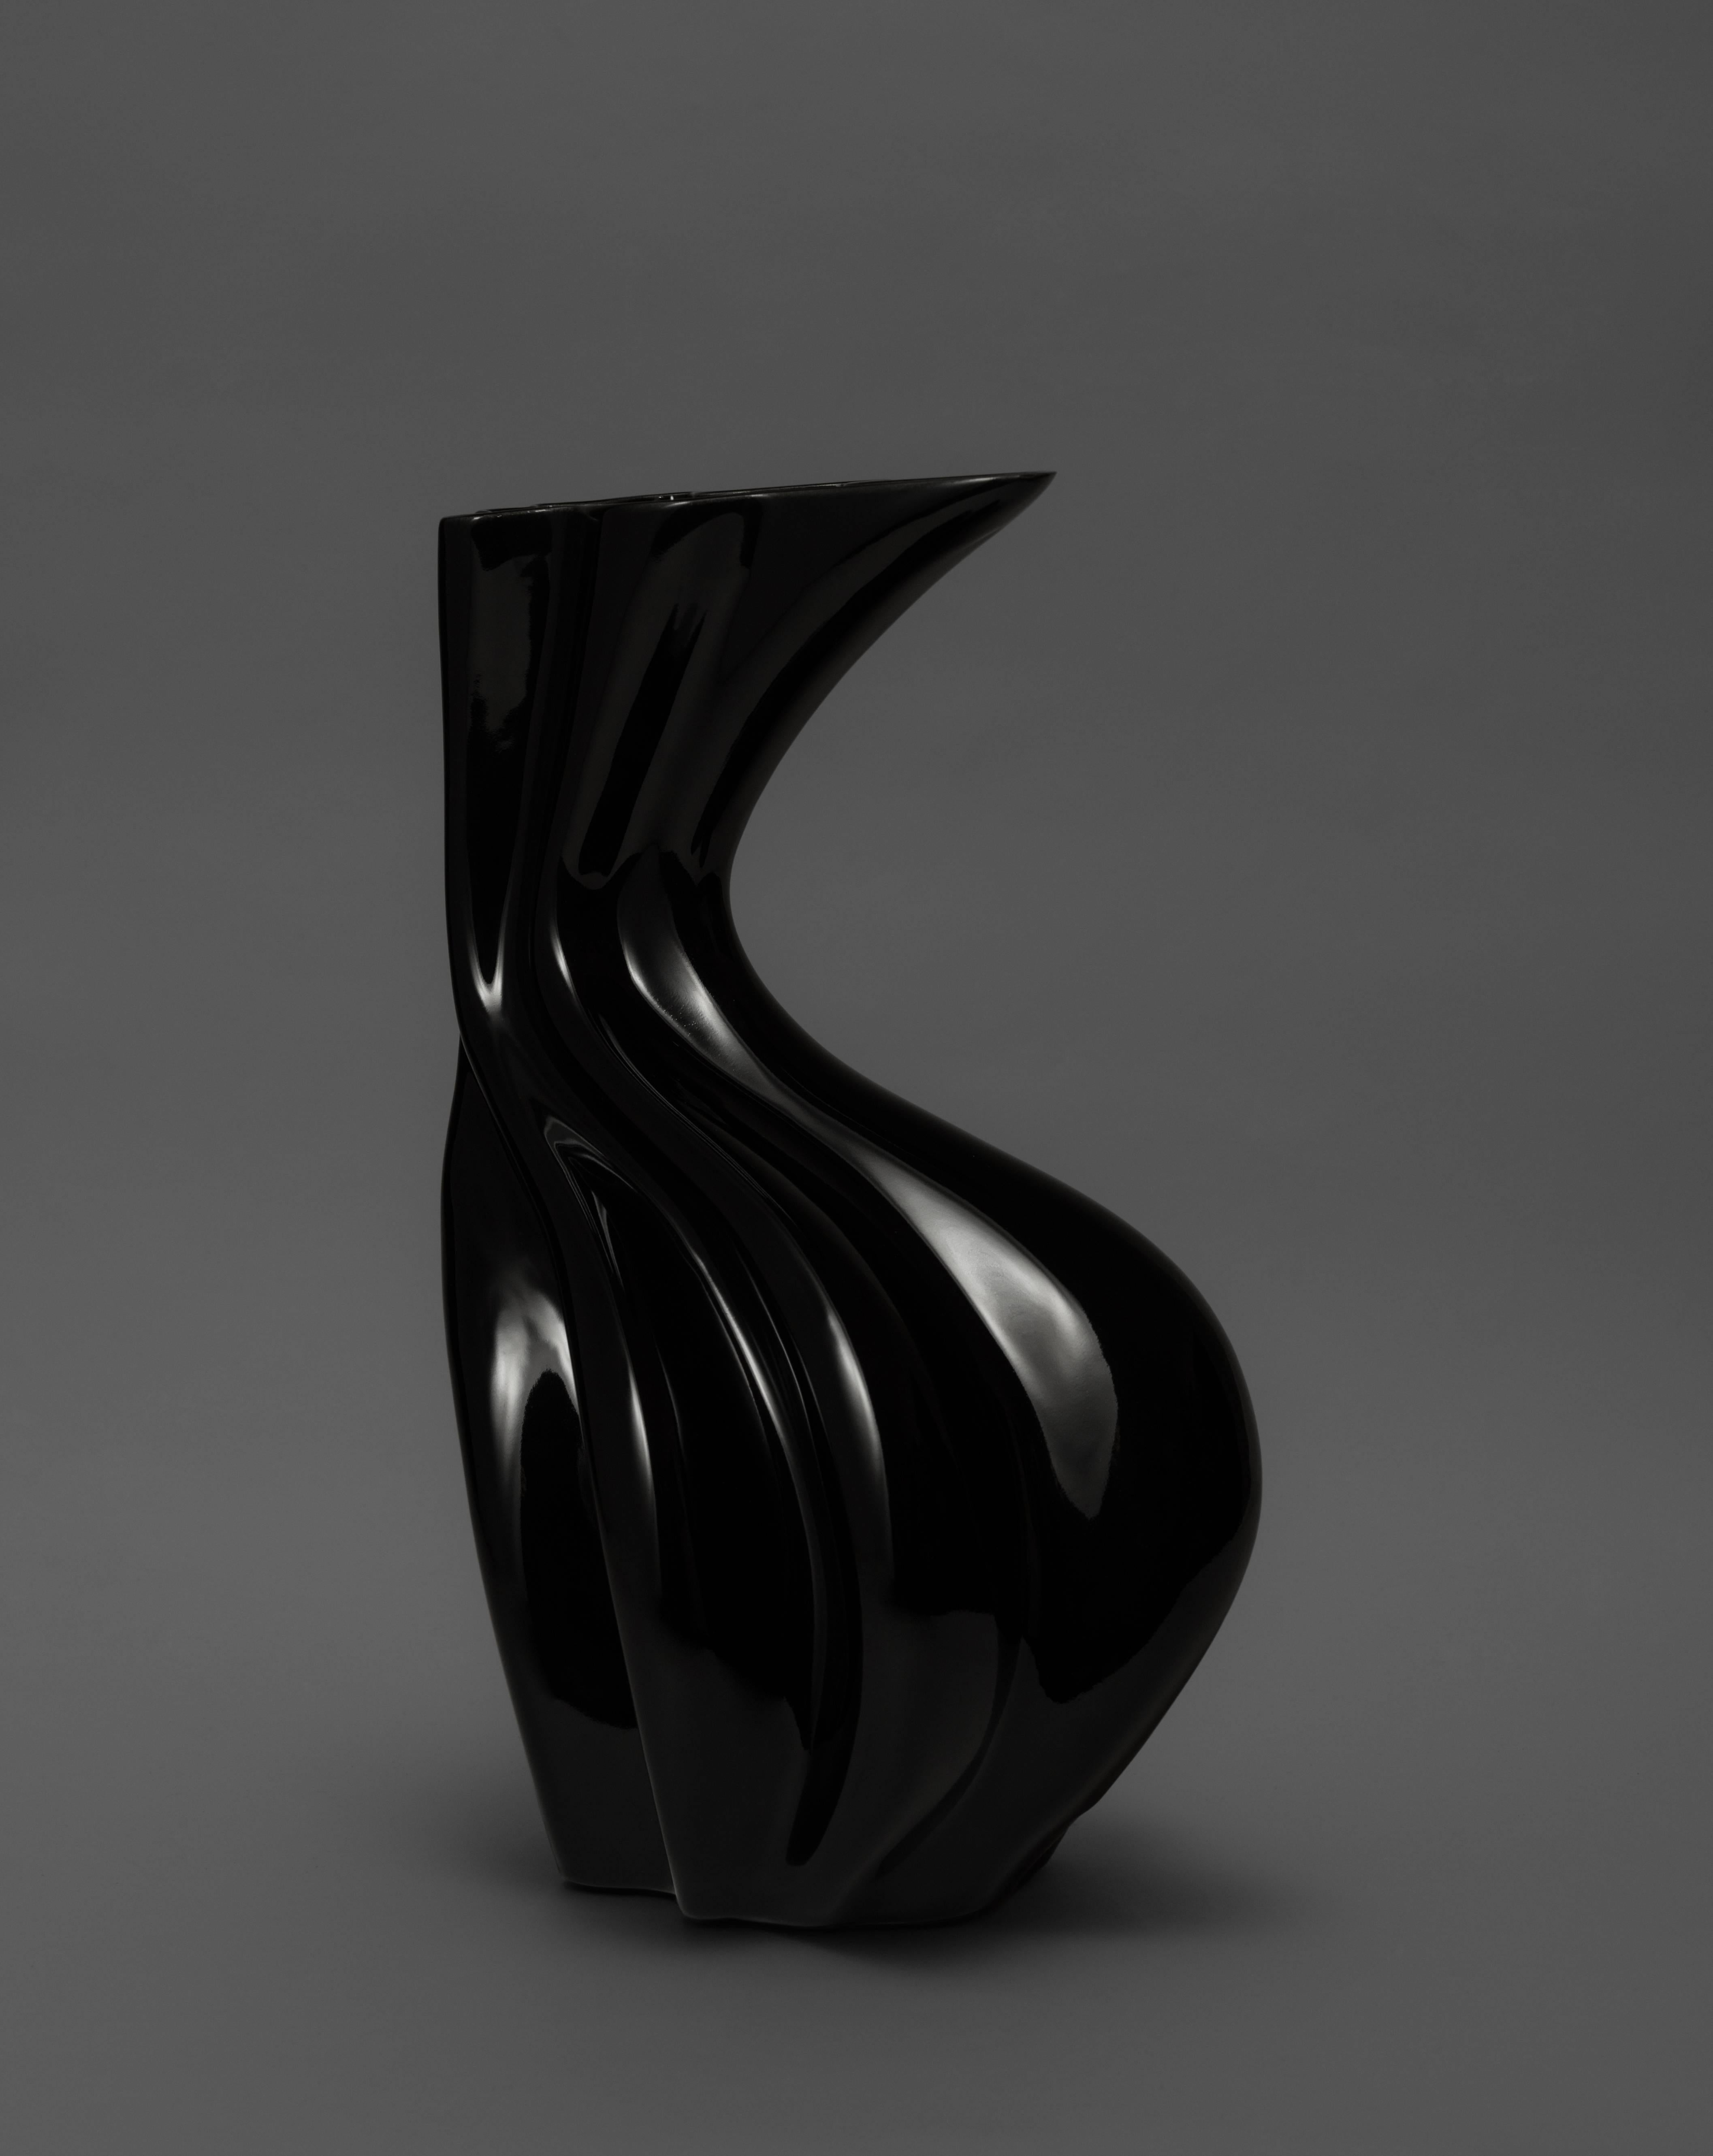 Other Contemporary Sinuo Black Handmade Ceramic Vase, Made in Italy For Sale